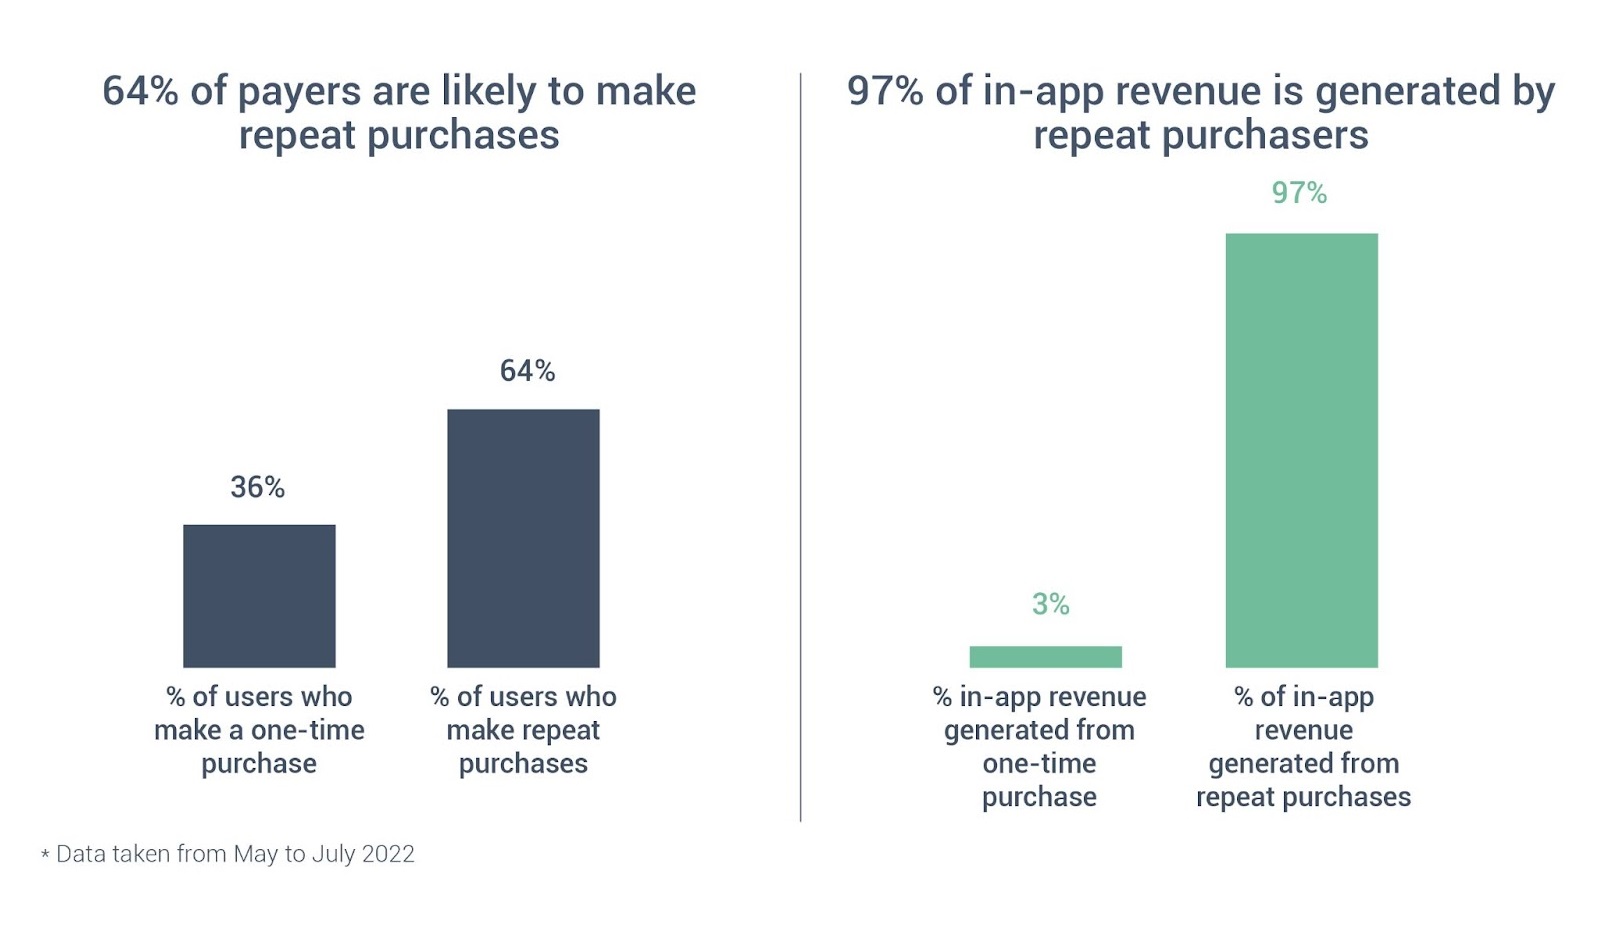 Repeat Prospects Drive 97% of the In-App Income for Video games / Digital Data World